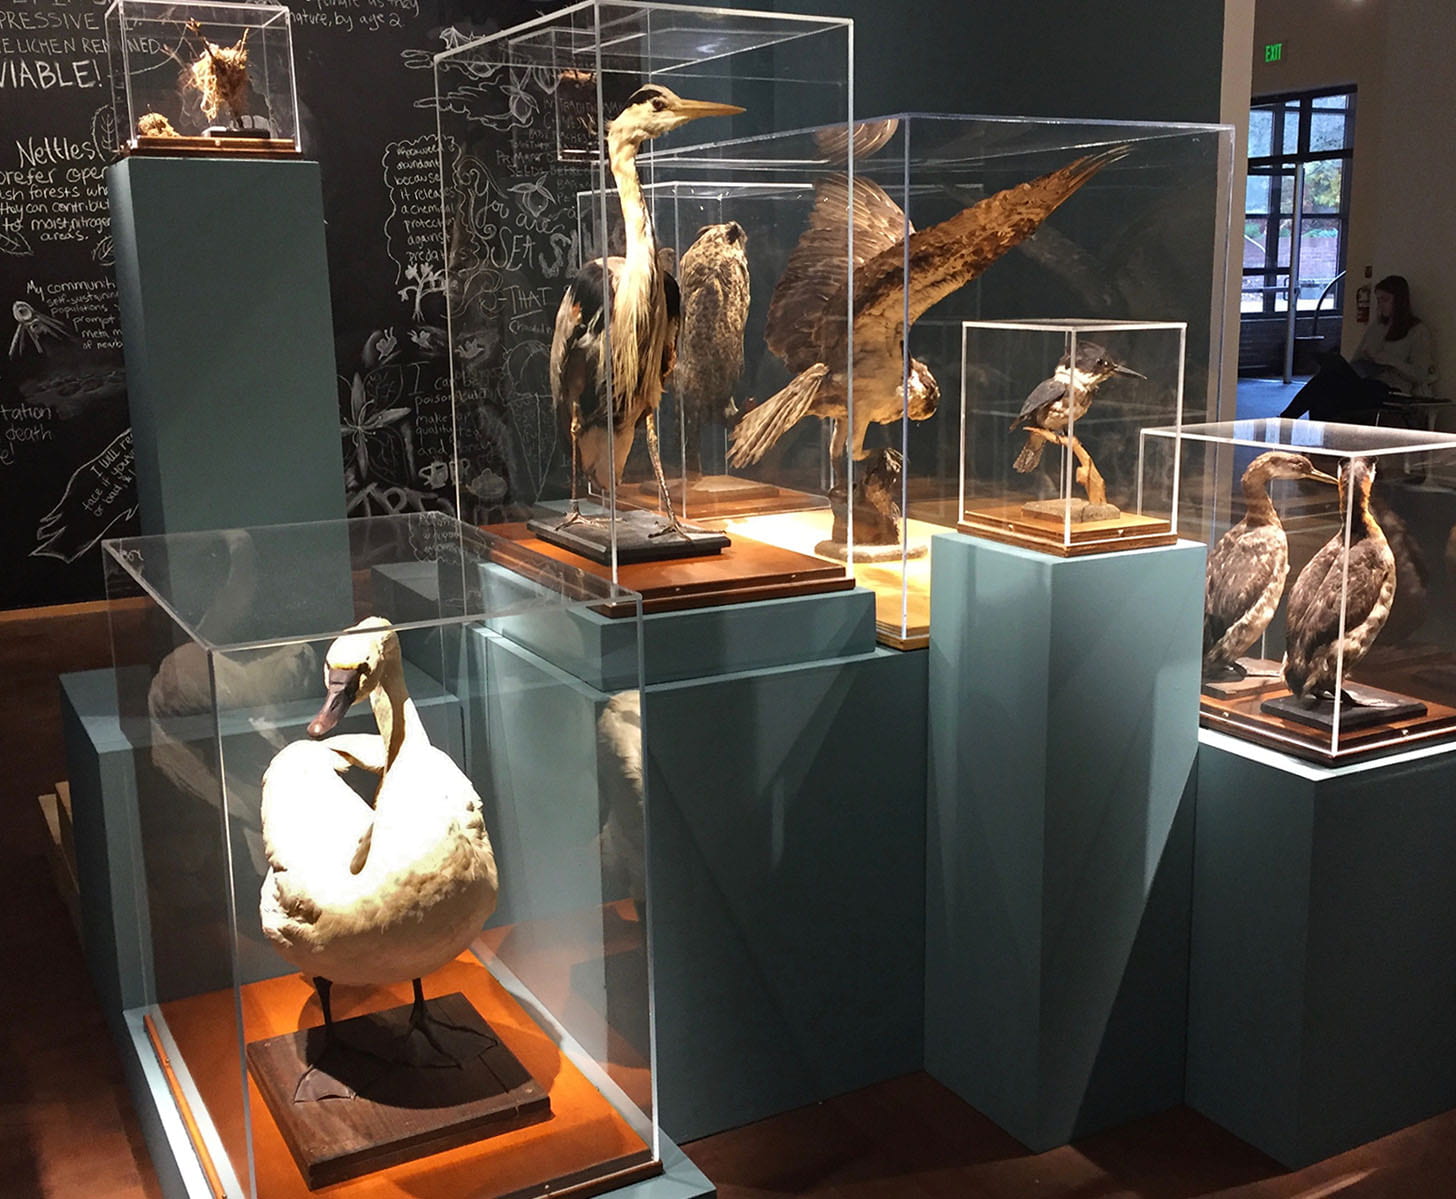 taxidermied birds in display cases: a swan, a heron, owl, osprey, kingfisher, and two ducks